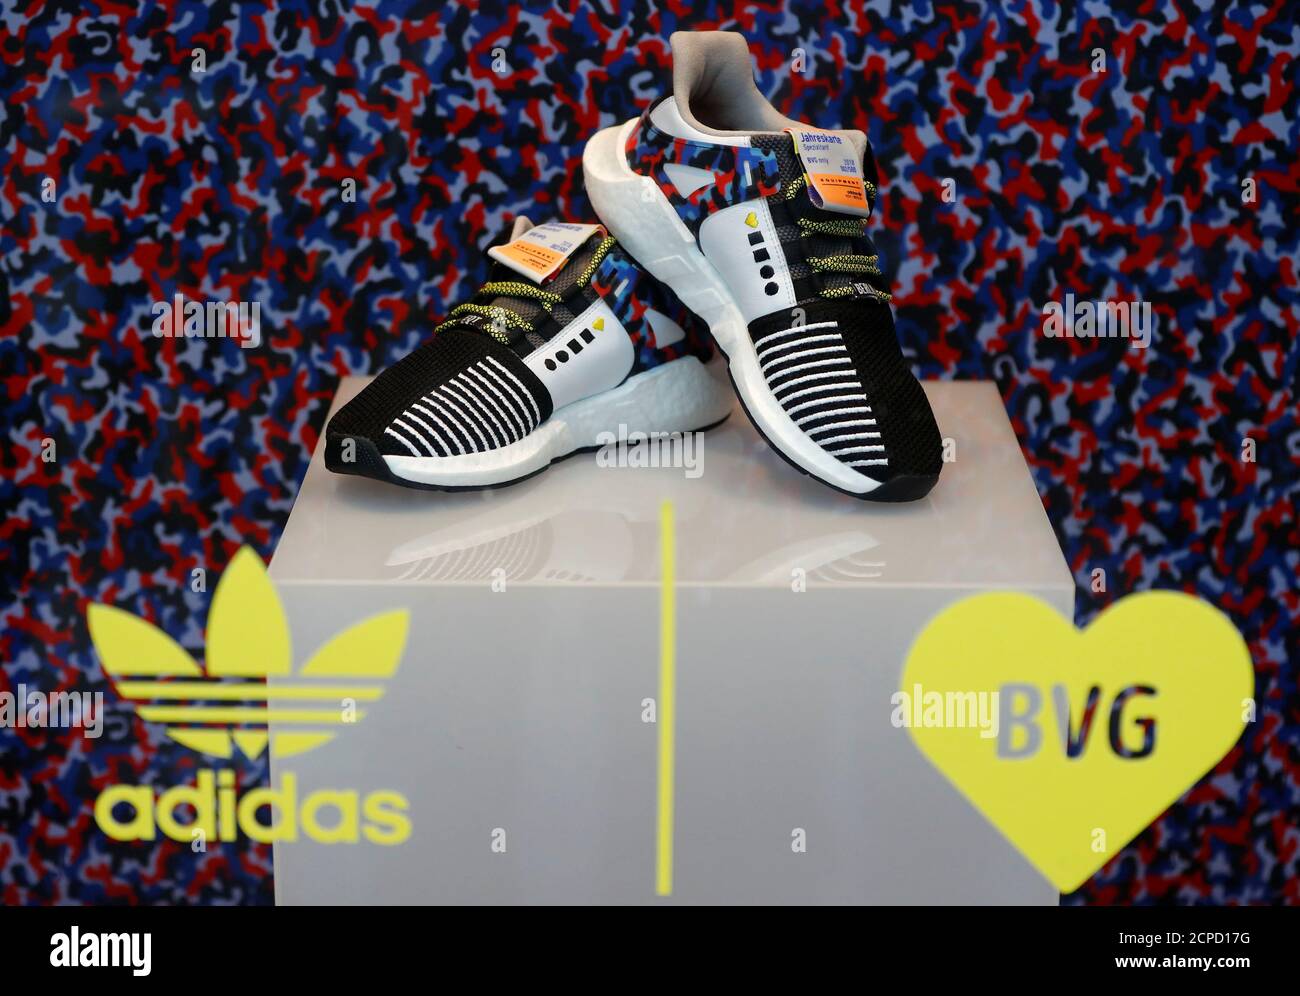 adidas limited edition shoes 2018